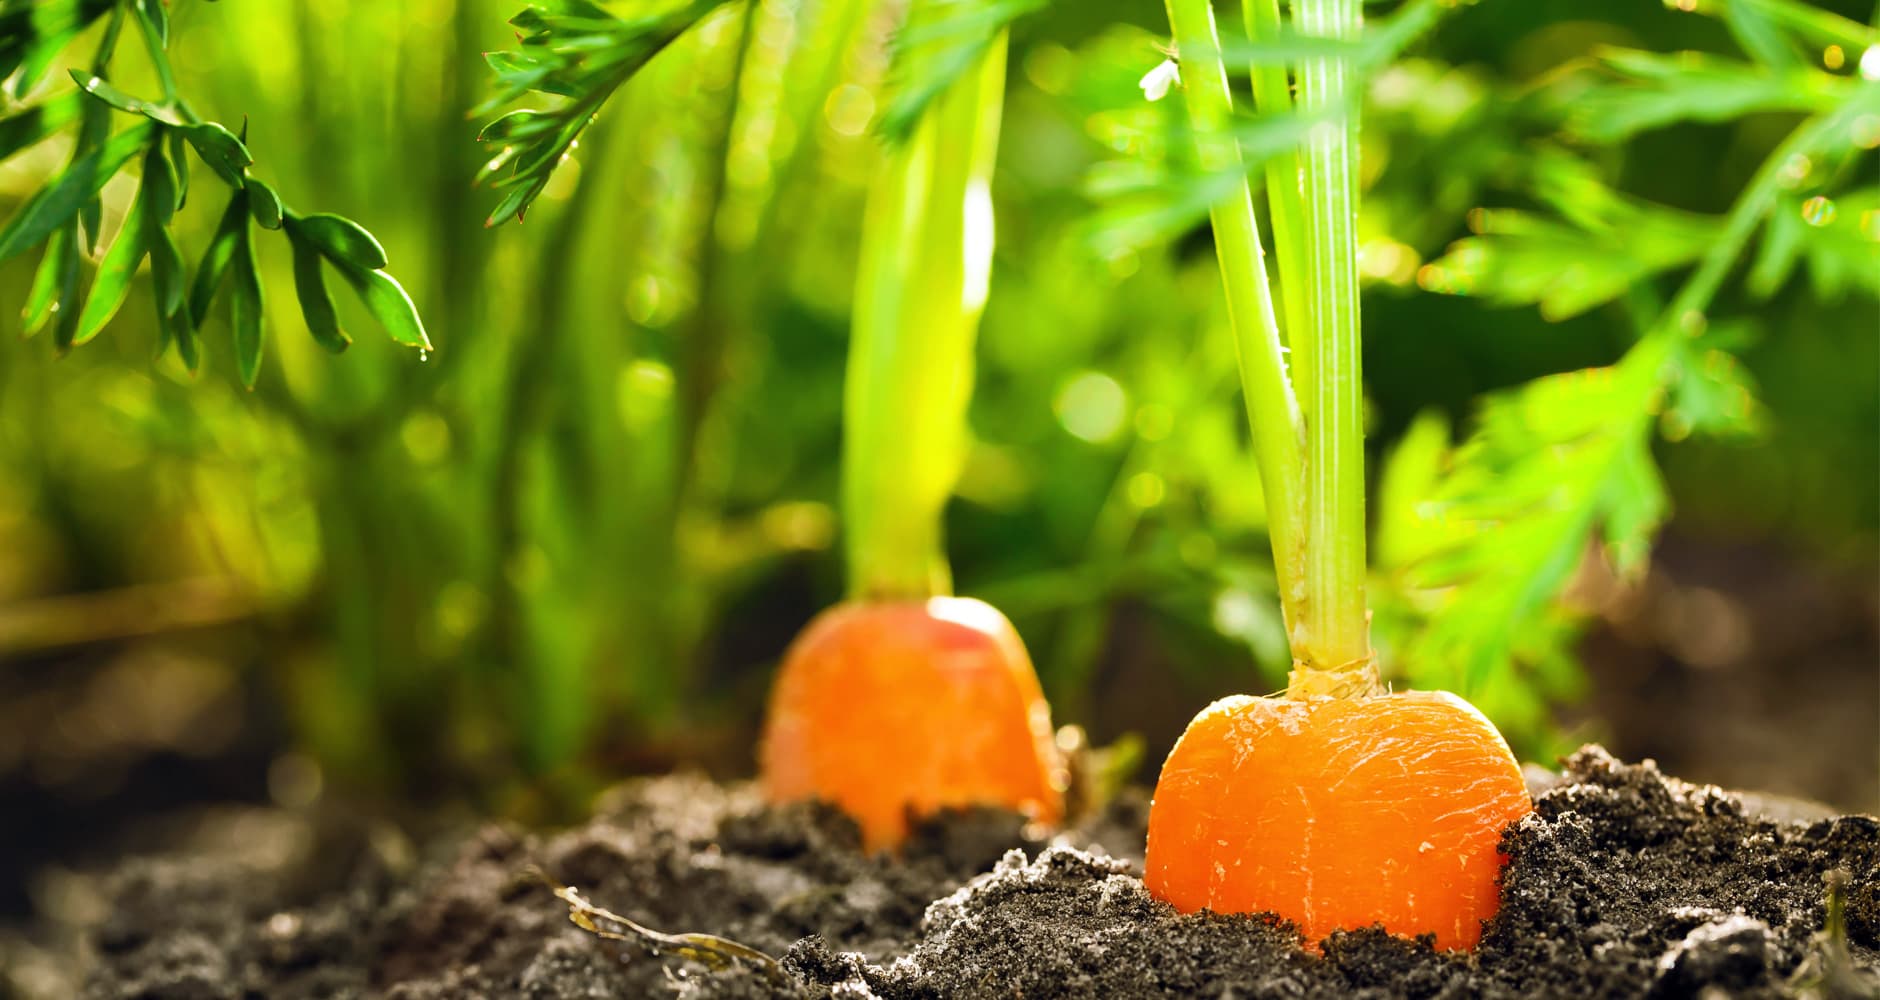 How To Plant Carrot Seeds In Garden